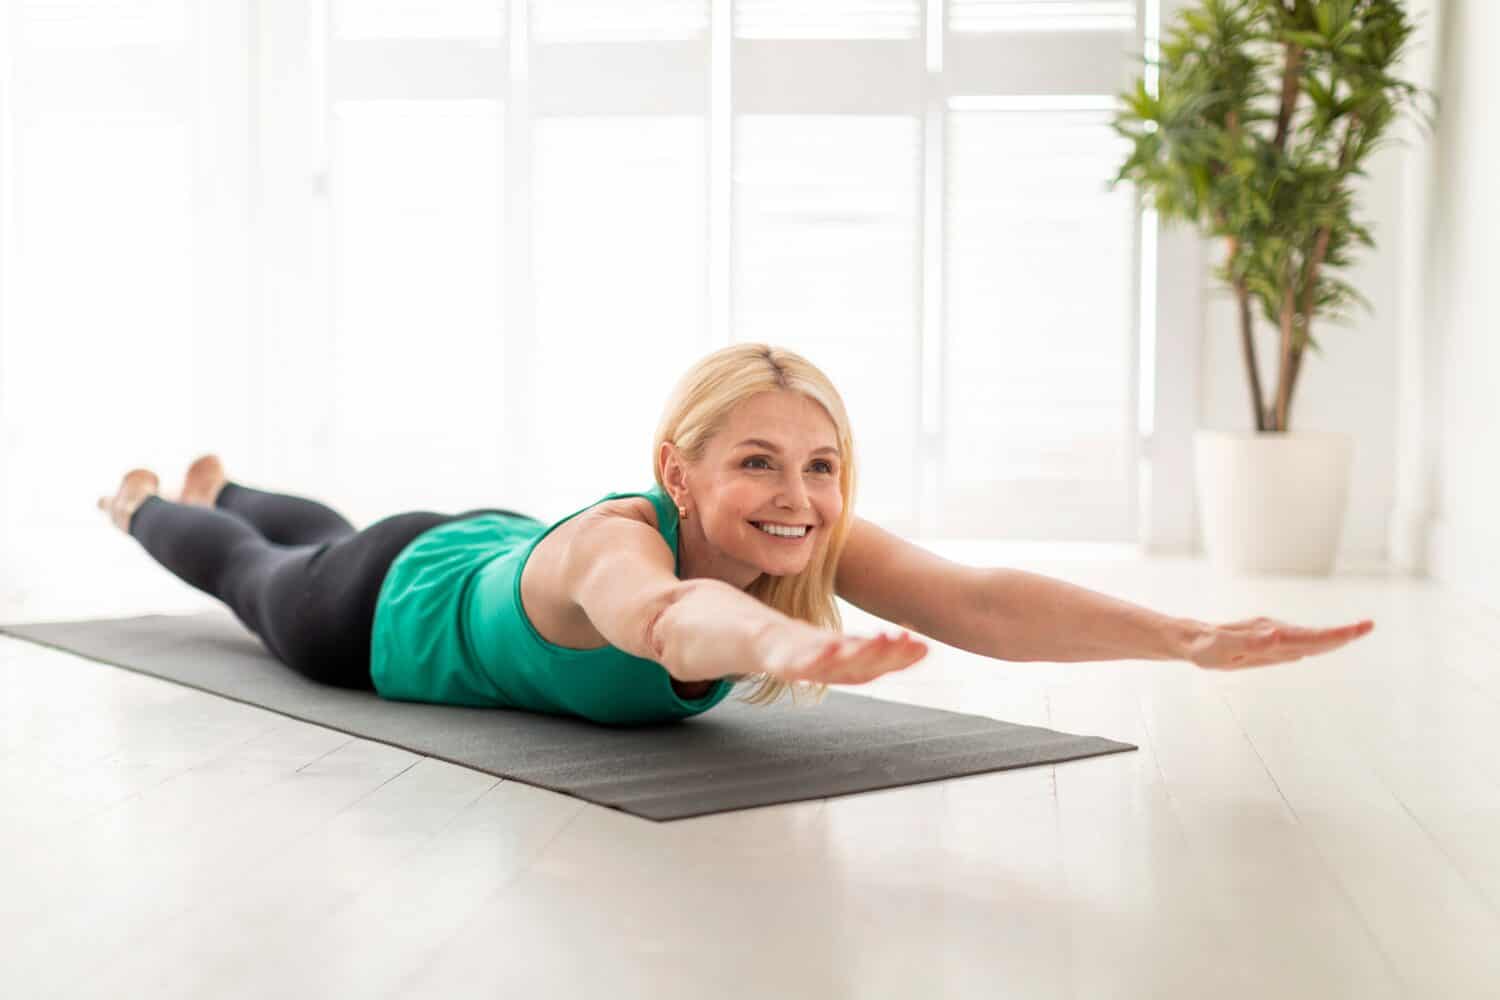 Sporty Senior Woman Making Superman Exercise While Training At Home, Smiling Mature Lady Doing Back Bending While Lying On Fitness Mat In Light Living Room, Raising Arms And Legs, Free Space